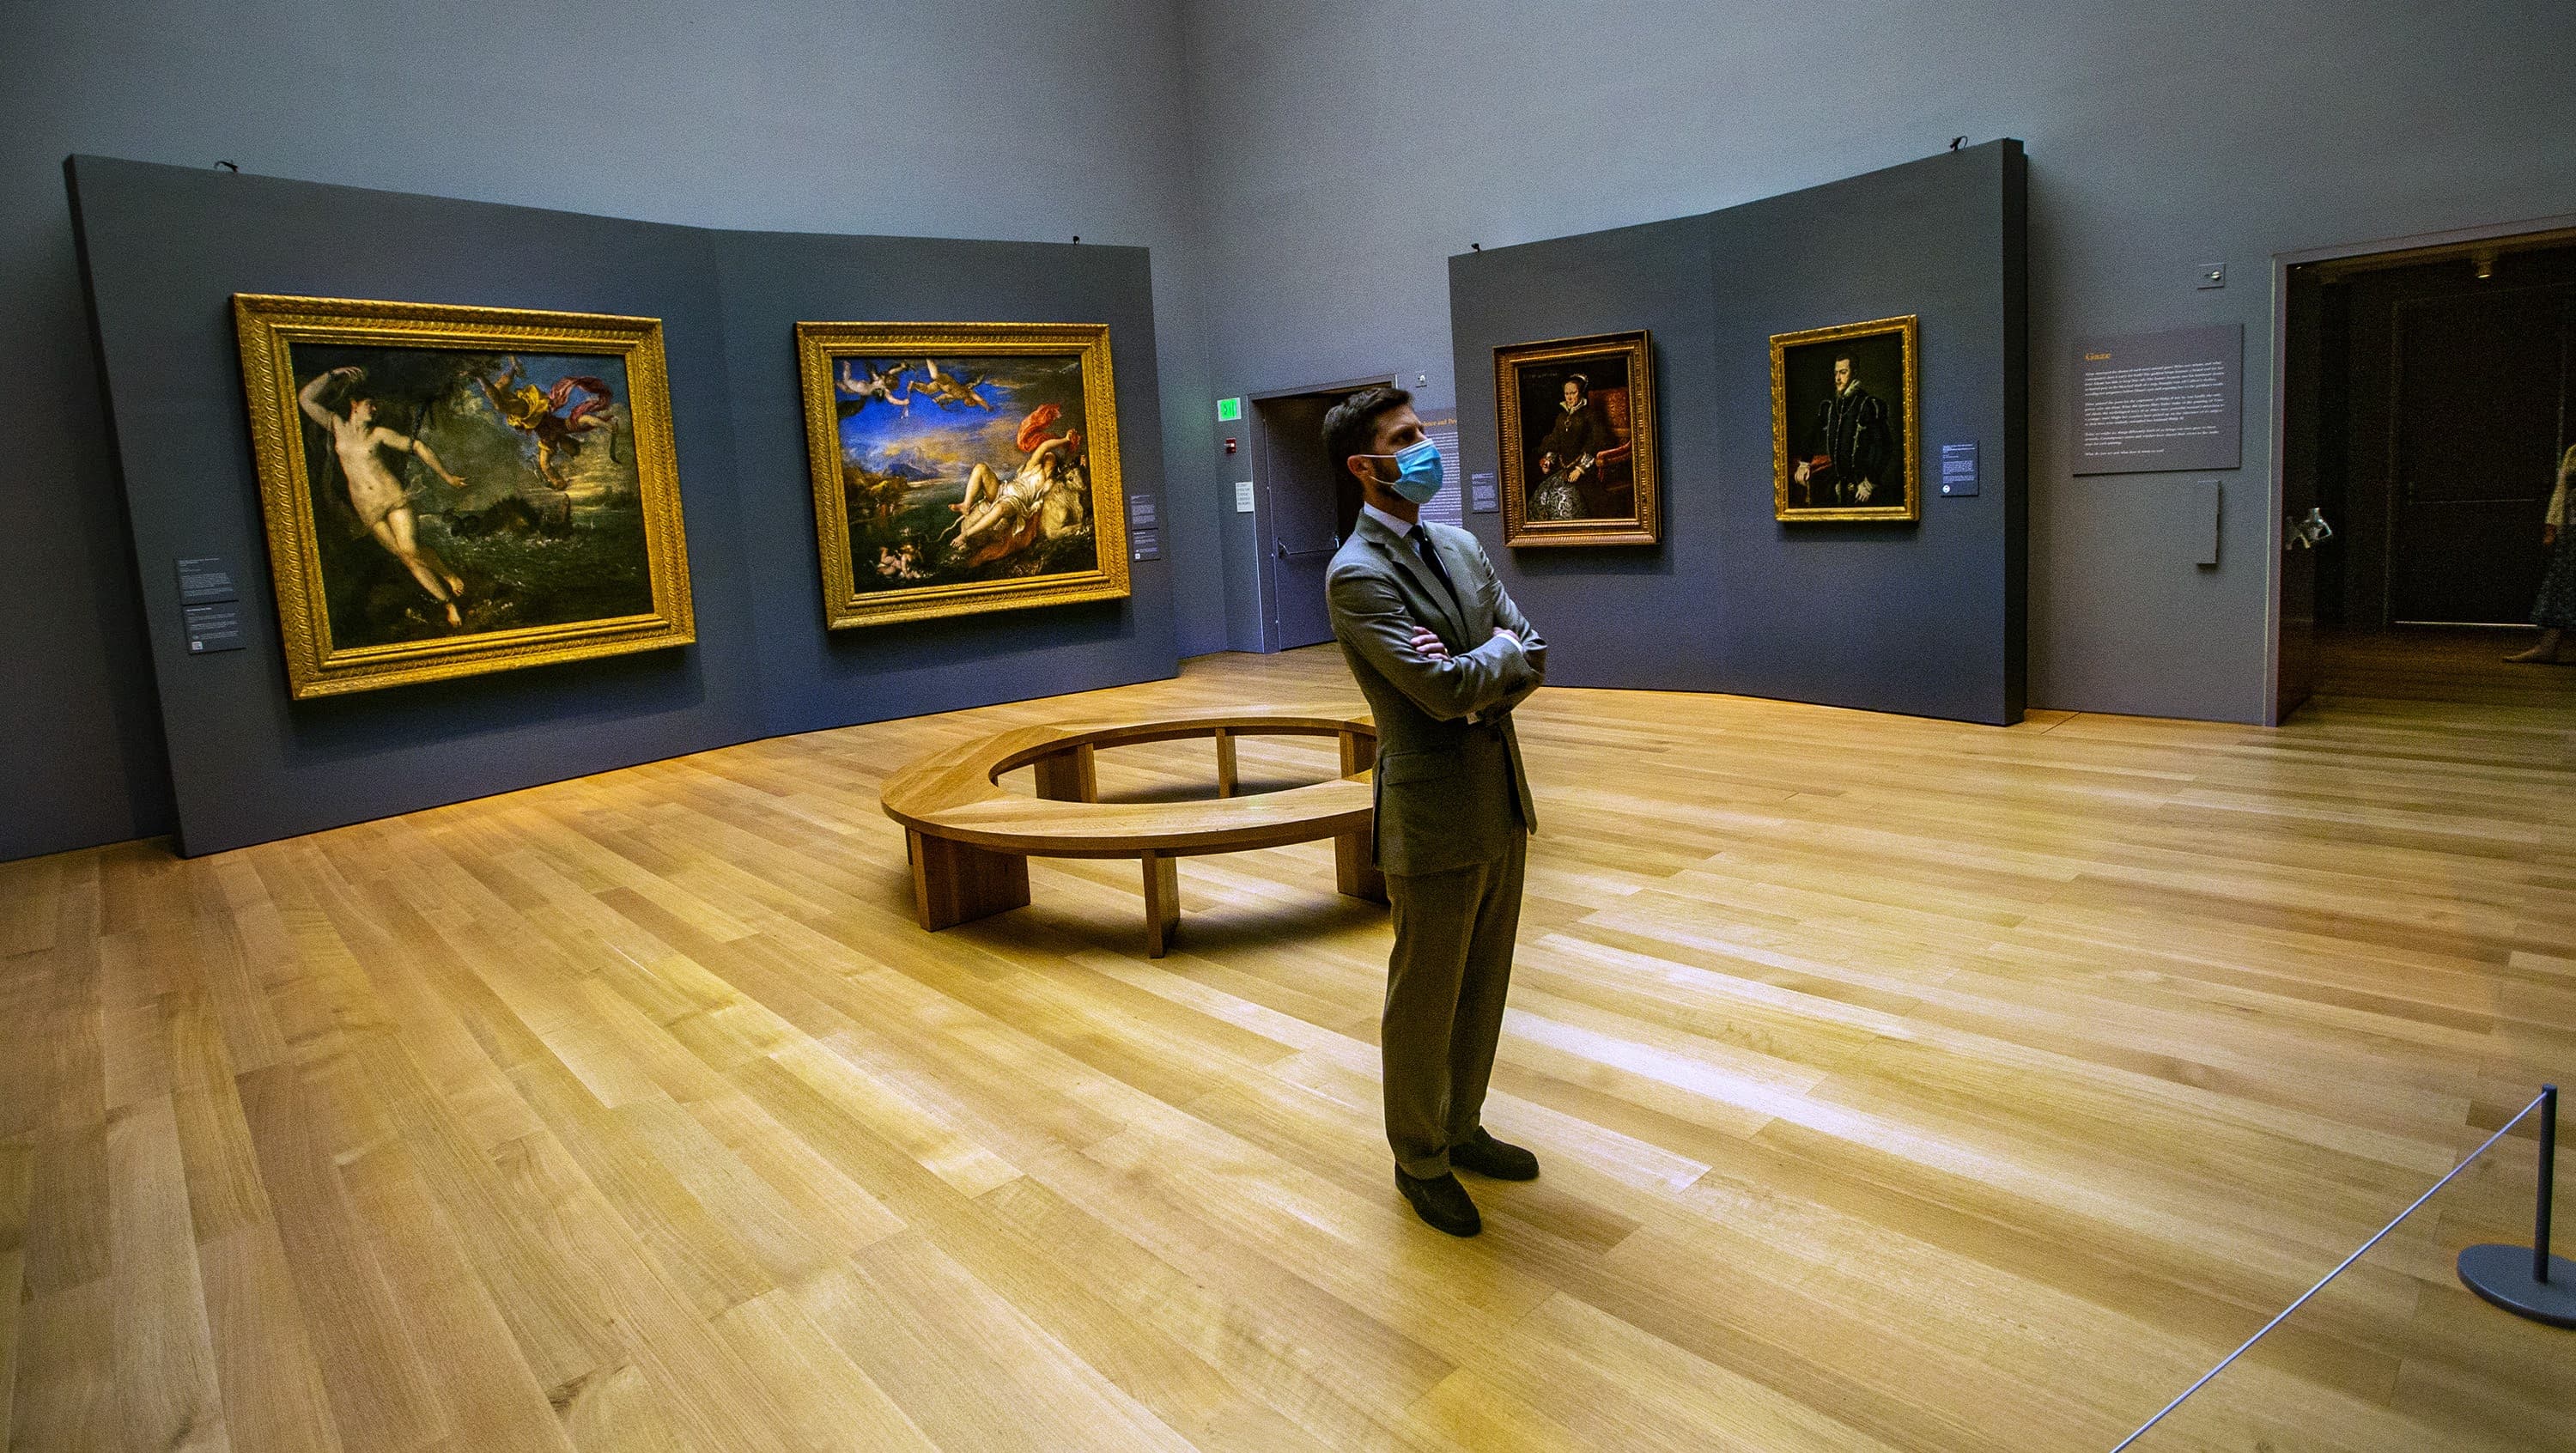 Curator Nat Silver examines Titian’s ‘Venus and Adonis’ during a check of the newly installed exhibit of the artist’s work in the Hostetter Gallery at the Isabella Stewart Gardner Museum. (Jesse Costa/WBUR)